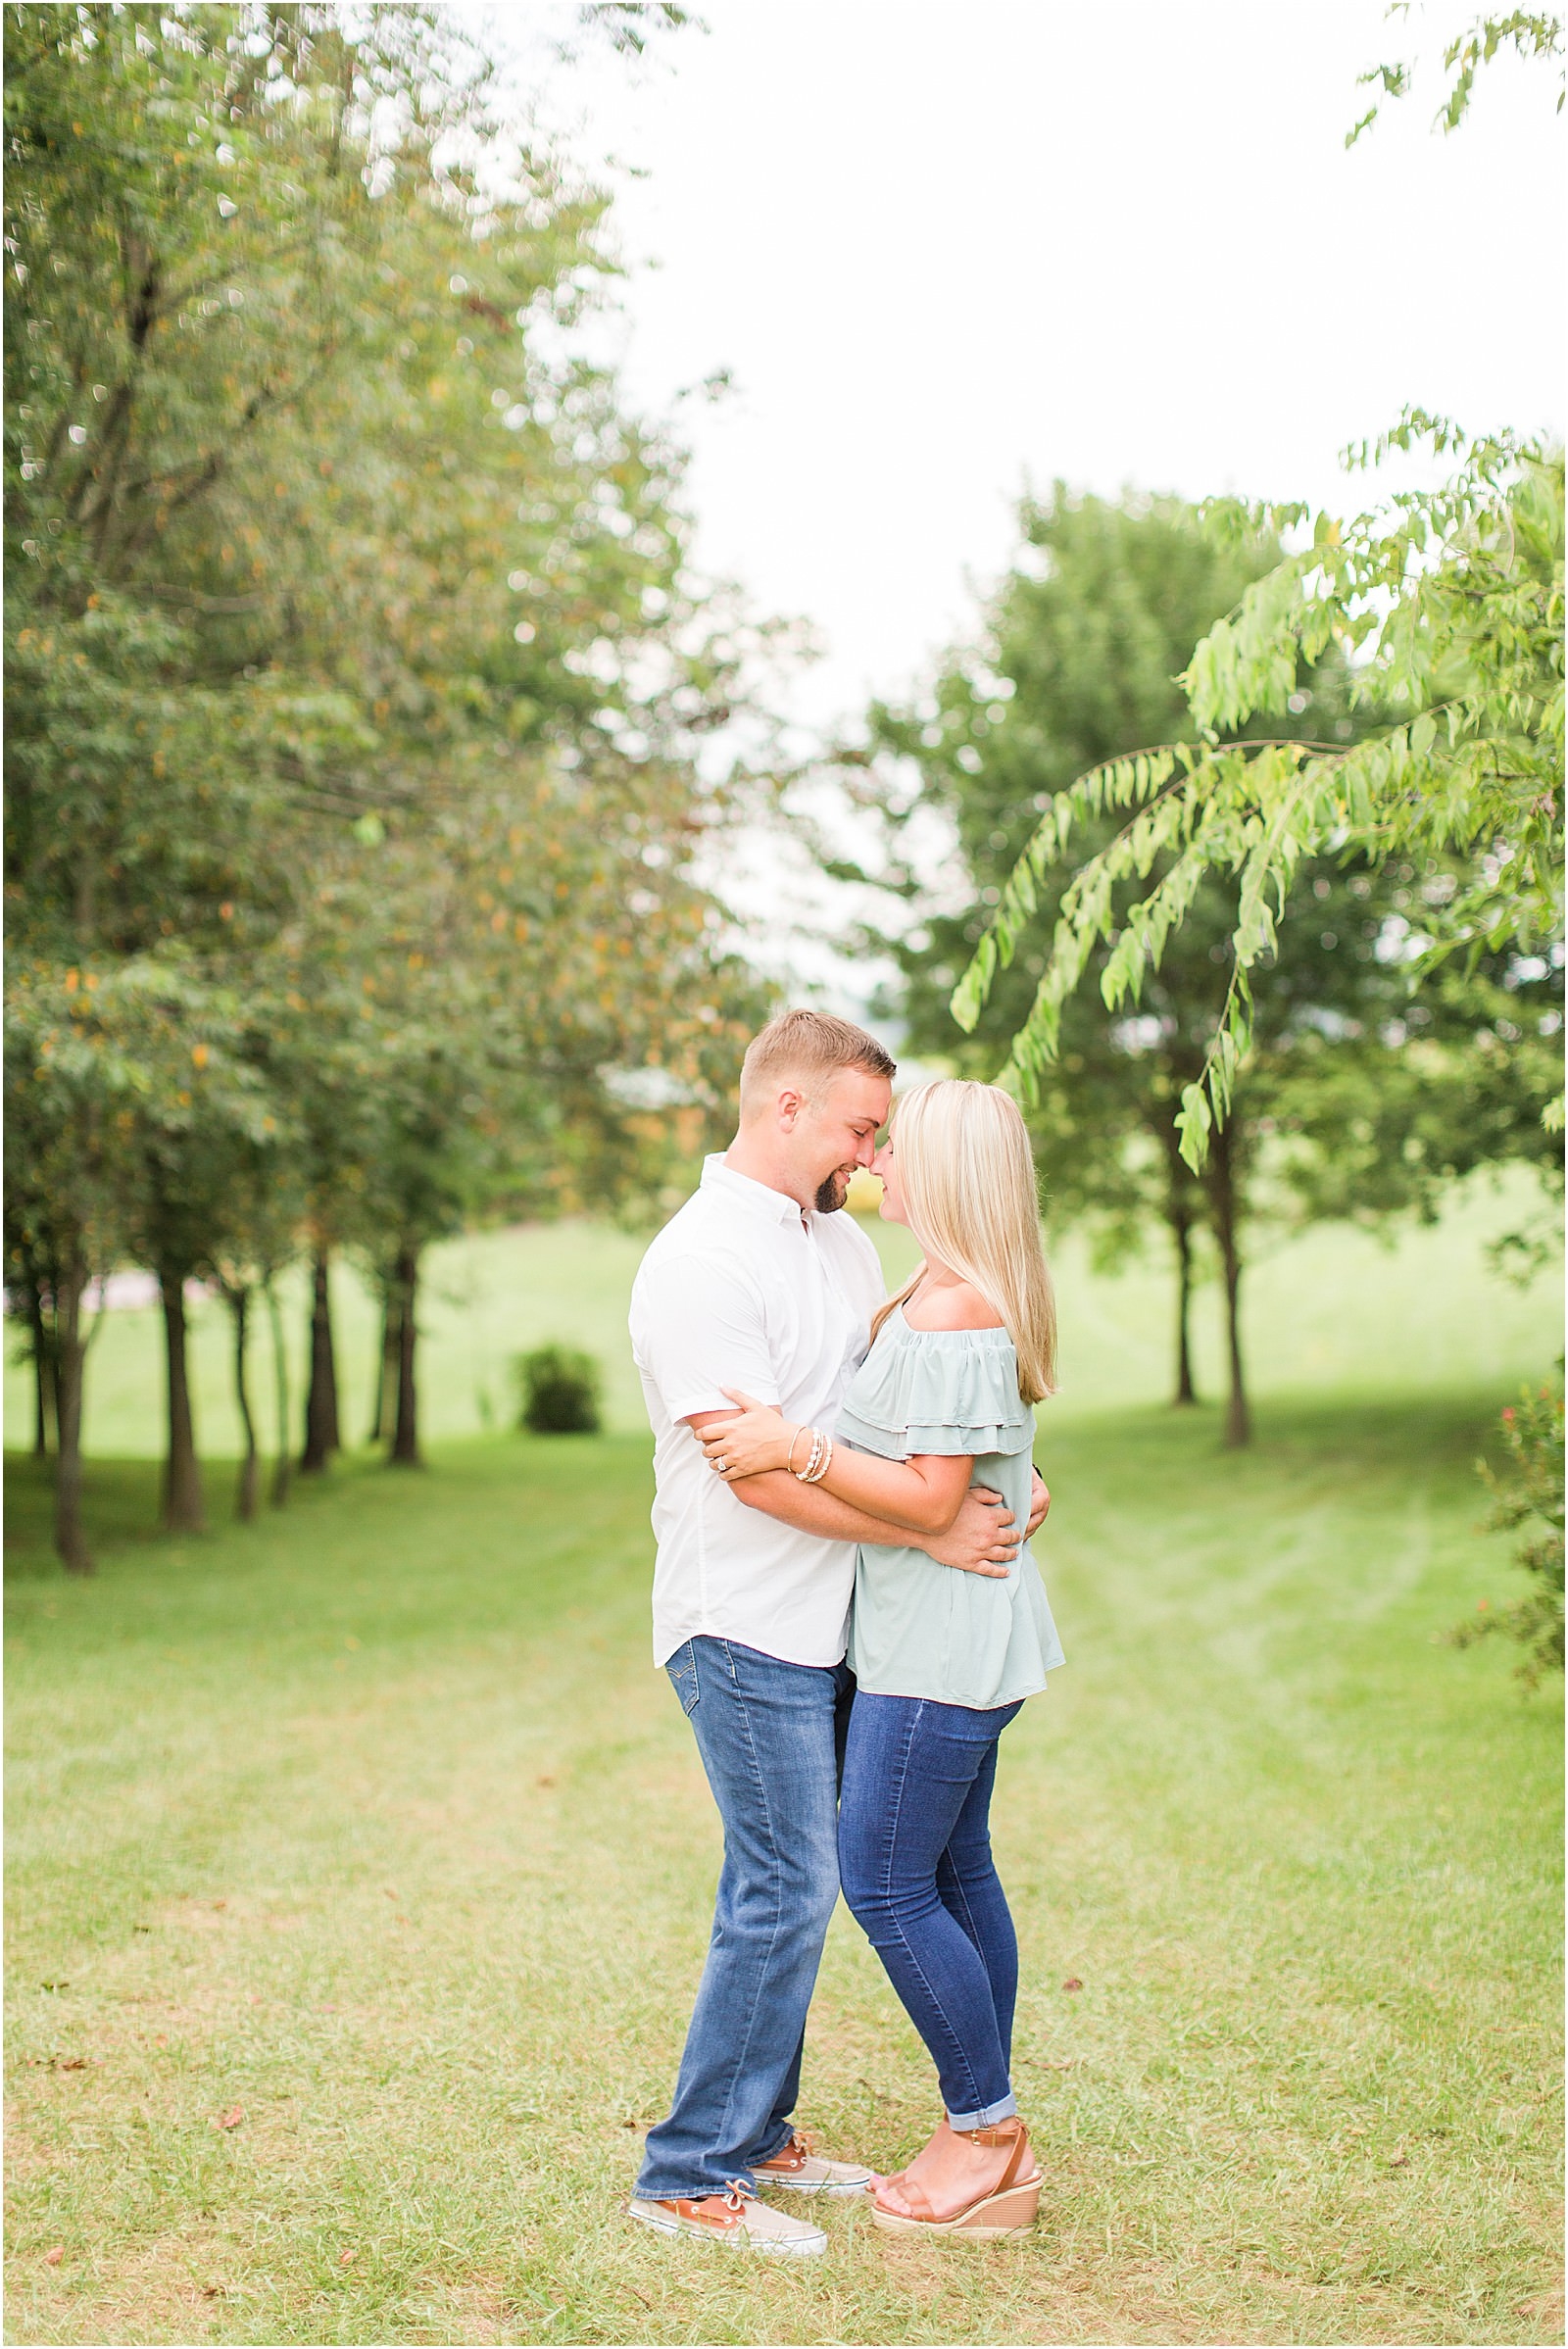 Lauren and Bryce | The Corner House B&ed and Breakfast Engagement Session | Bret and Brandie Photography 001.jpg